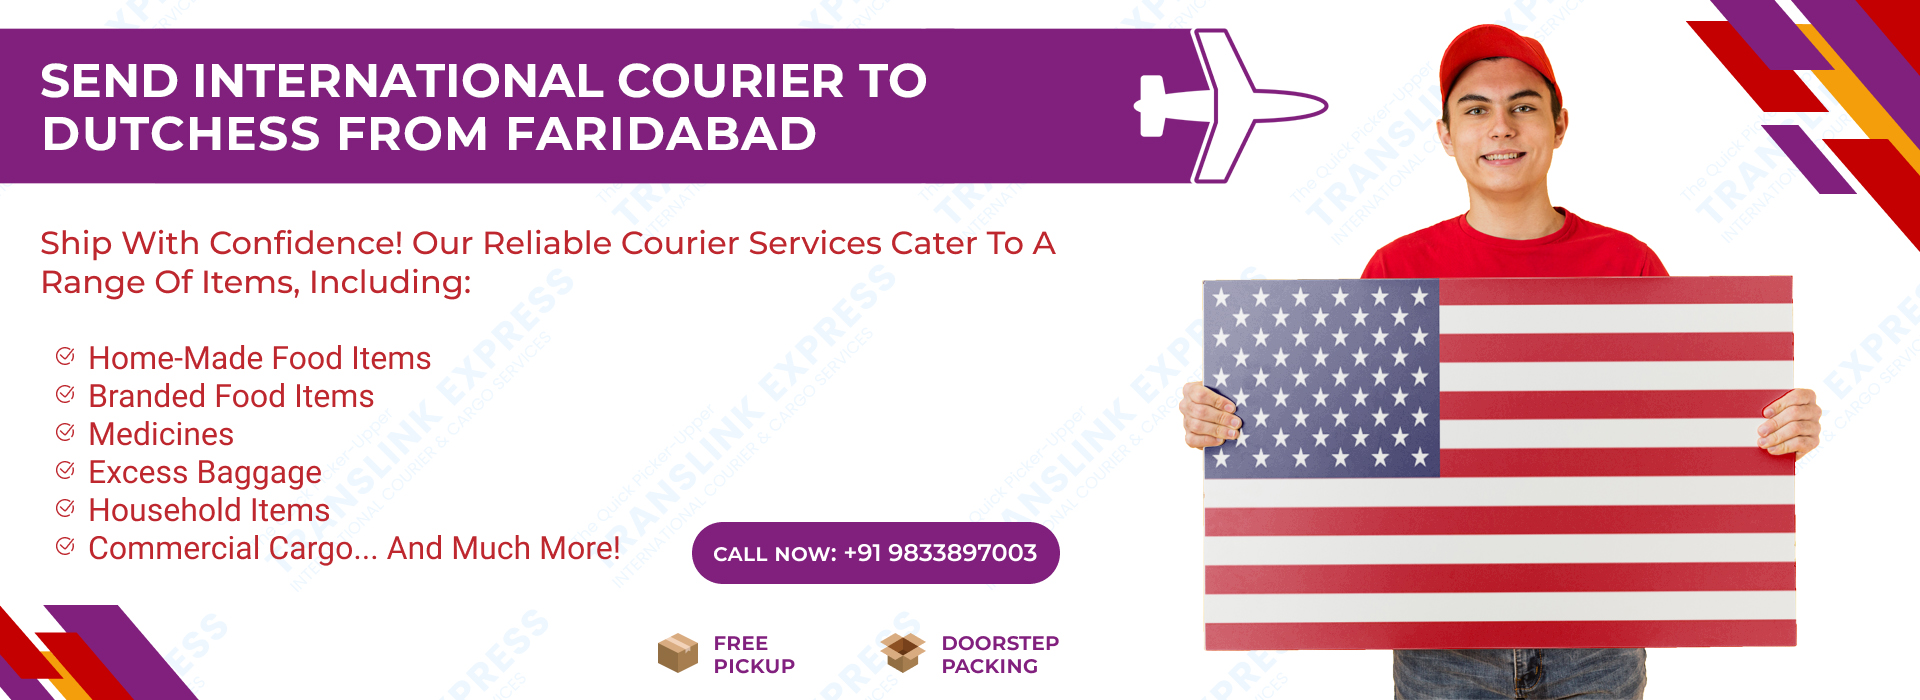 Courier to Dutchess From Faridabad